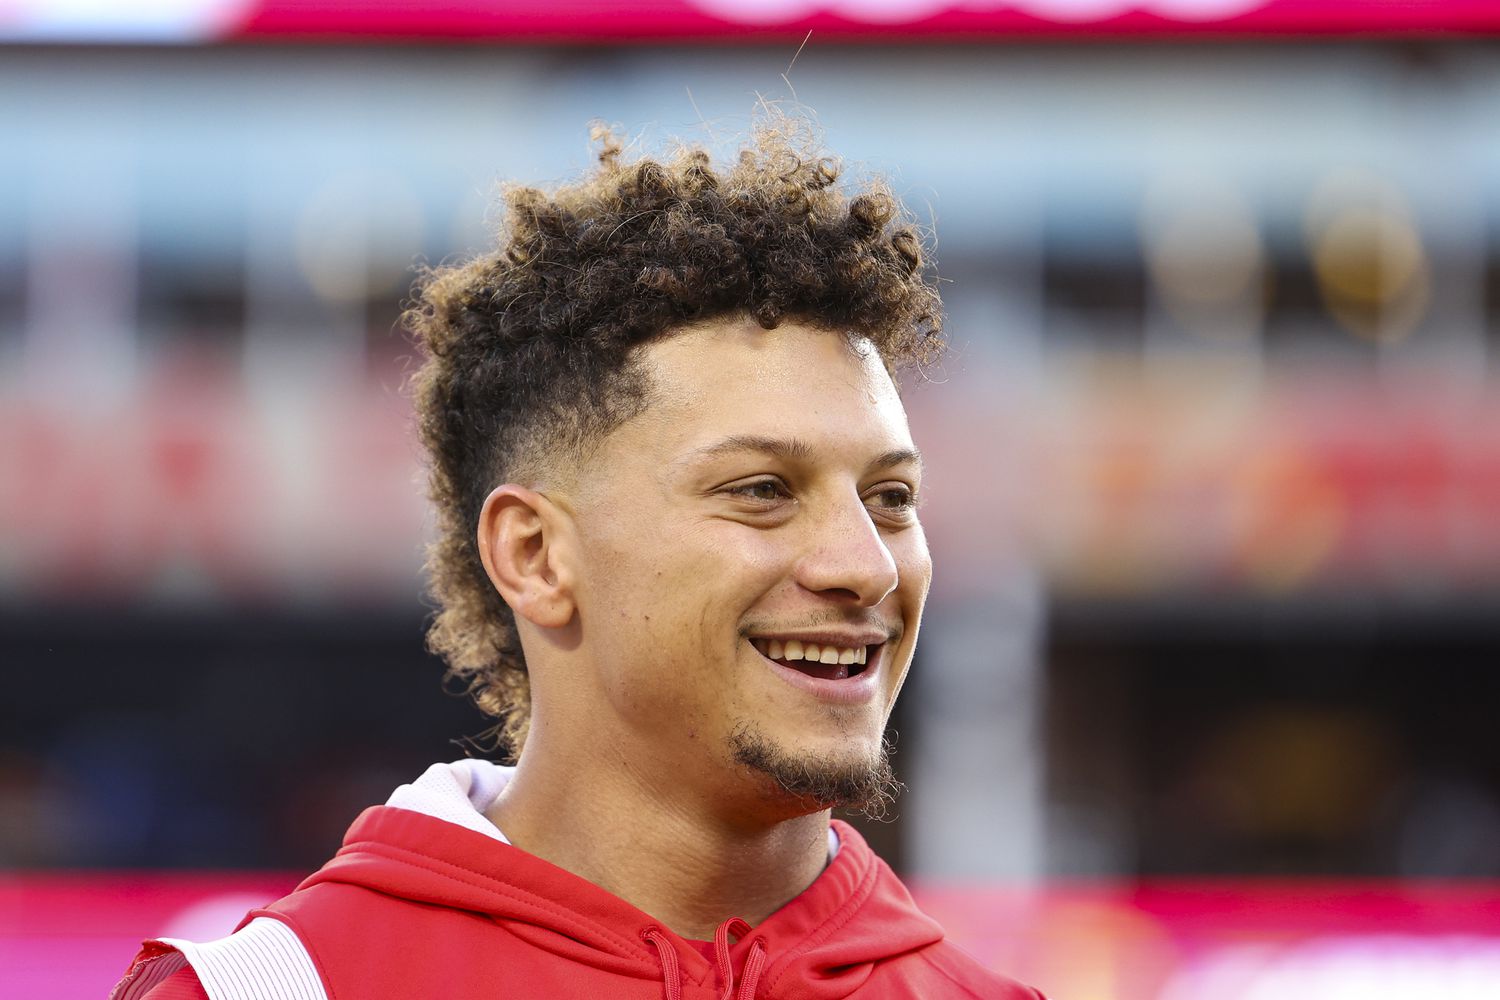 Patrick Mahomes' High School Signed Baseball Hits Auction, Expected To Fetch Five Figures